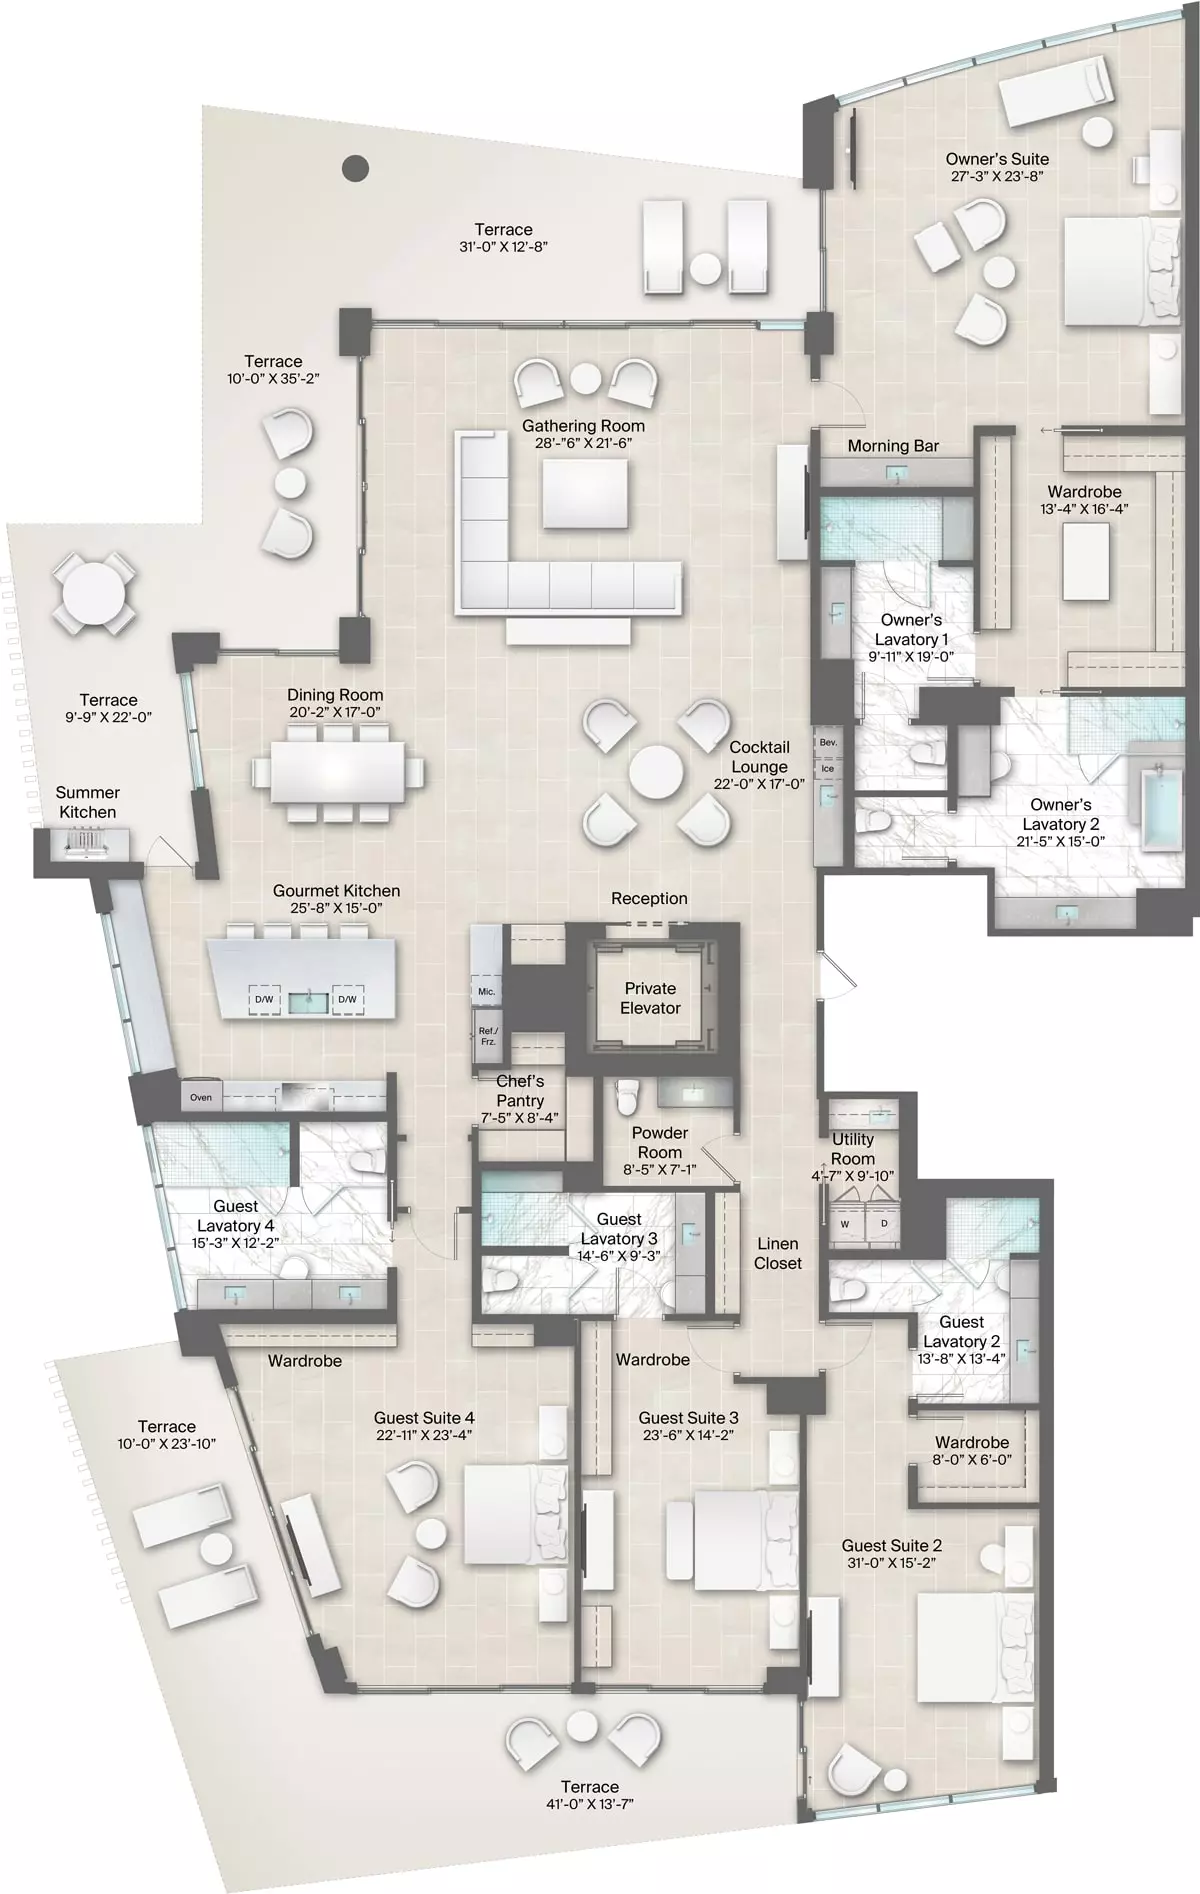 Champagne Building, Plan 9 & 18 Floorplan includes 4 bedrooms, 5.5 baths and 2 terraces 